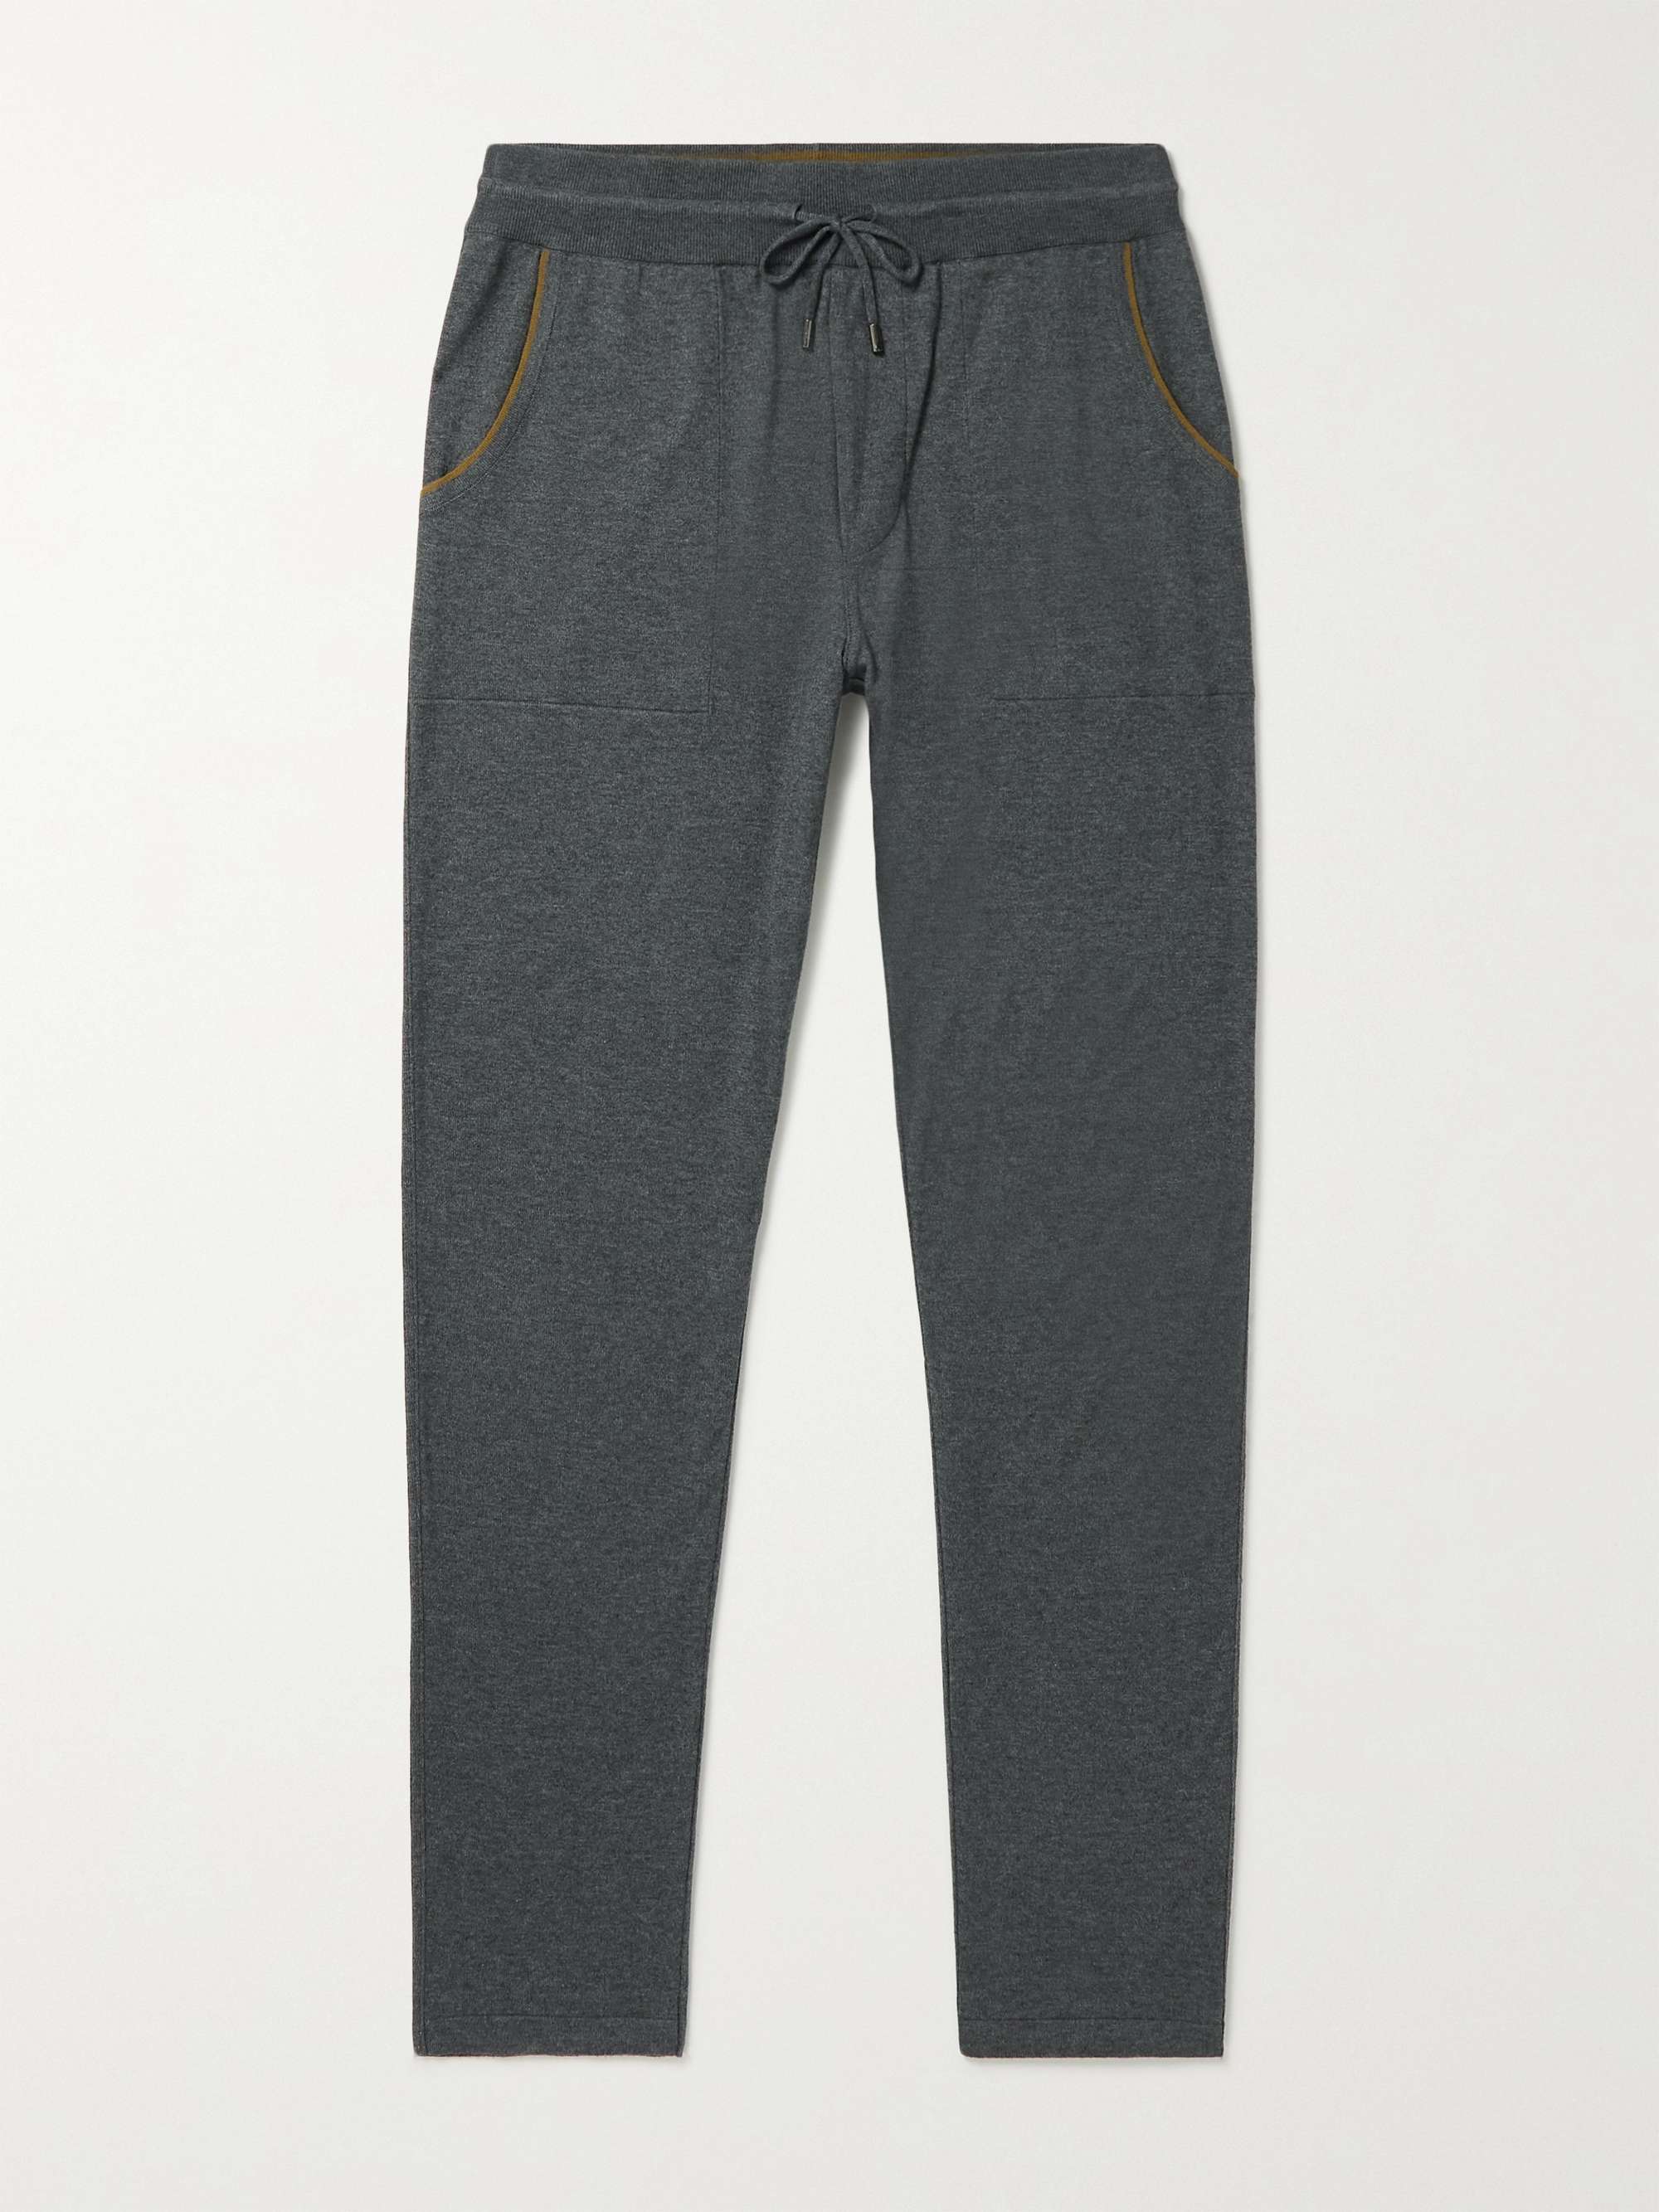 LORO PIANA Tapered Cashmere and Cotton-Blend Sweatpants